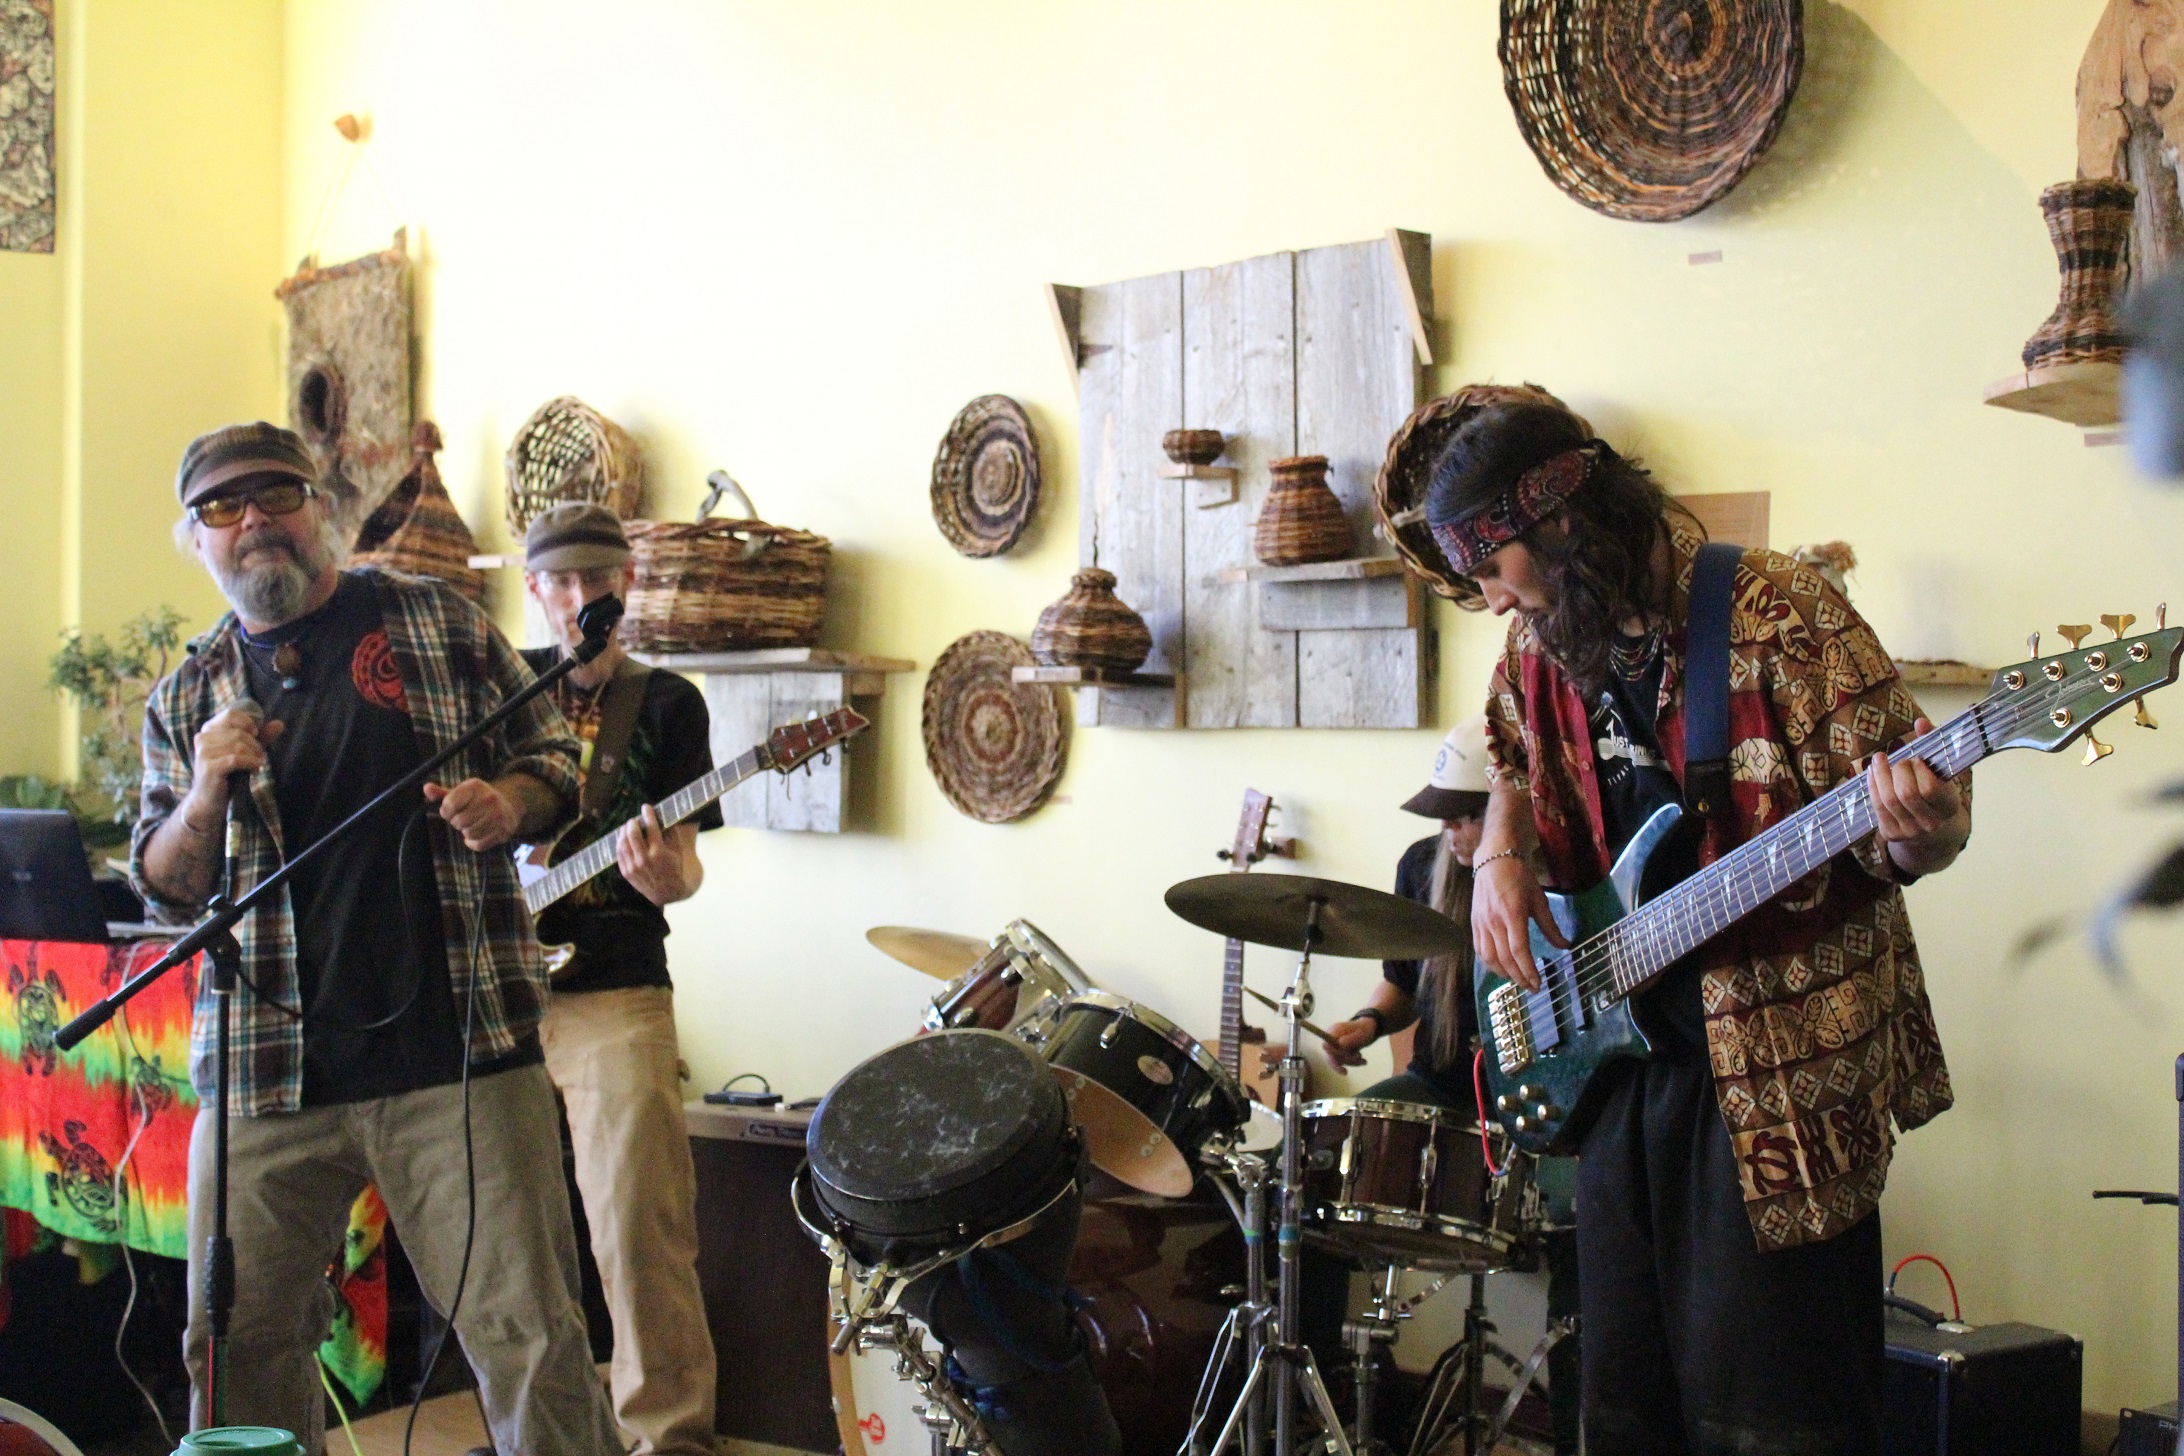 Local band Uplift plays at the event to support protestors at Standing Rock on Nov. 5 at K Bay Caffe. Homer native Lucas Wilcox worked in the protest camps in North Dakota providing food for protestors of the heavily contested oil pipeline. Wilcox hopes to raise money to bring back tents for shelter as the protest continues into the winter.-Photo by Anna Frost, Homer News